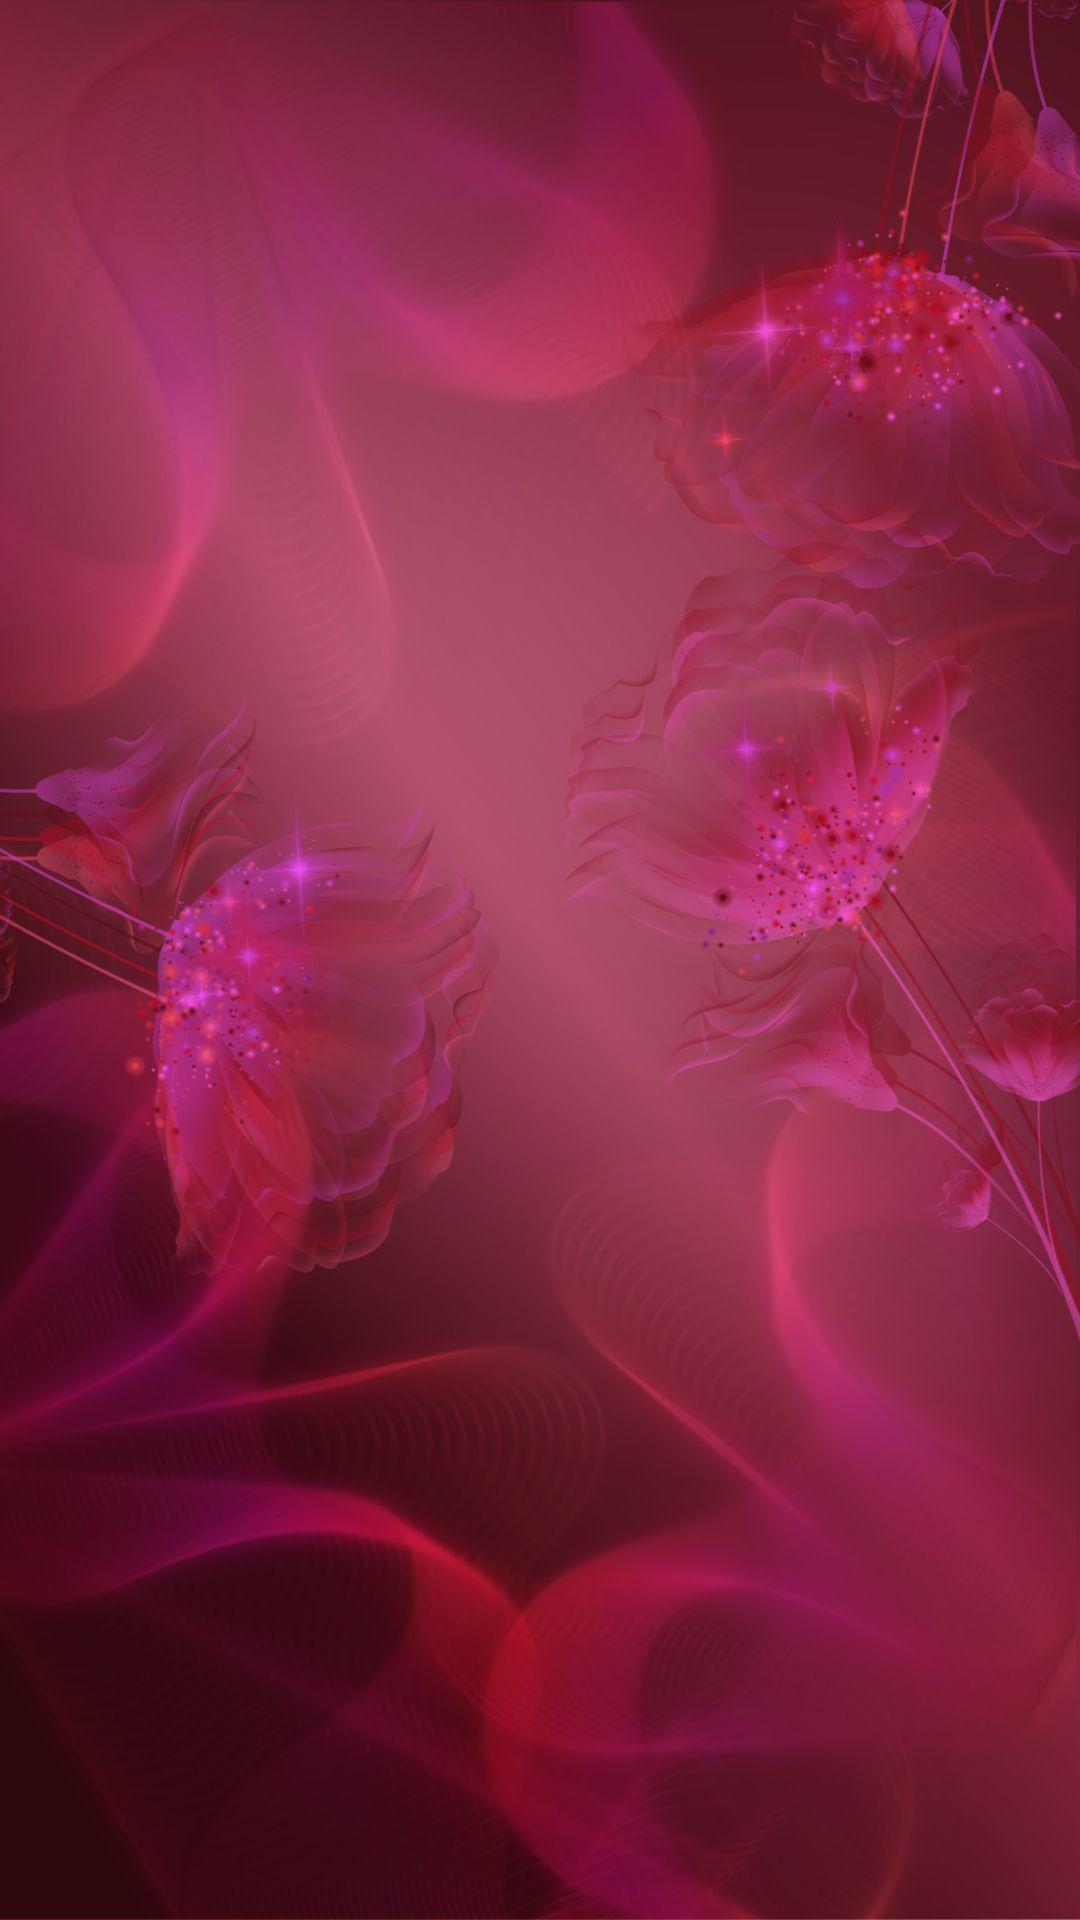 Psychedelic Wallpaper Background With Glowing Flowers On Pink Red Violet Gradient, 1080*1820 (9 16).. Glowing Flowers, Pink And Red Wallpaper, Pretty Wallpaper